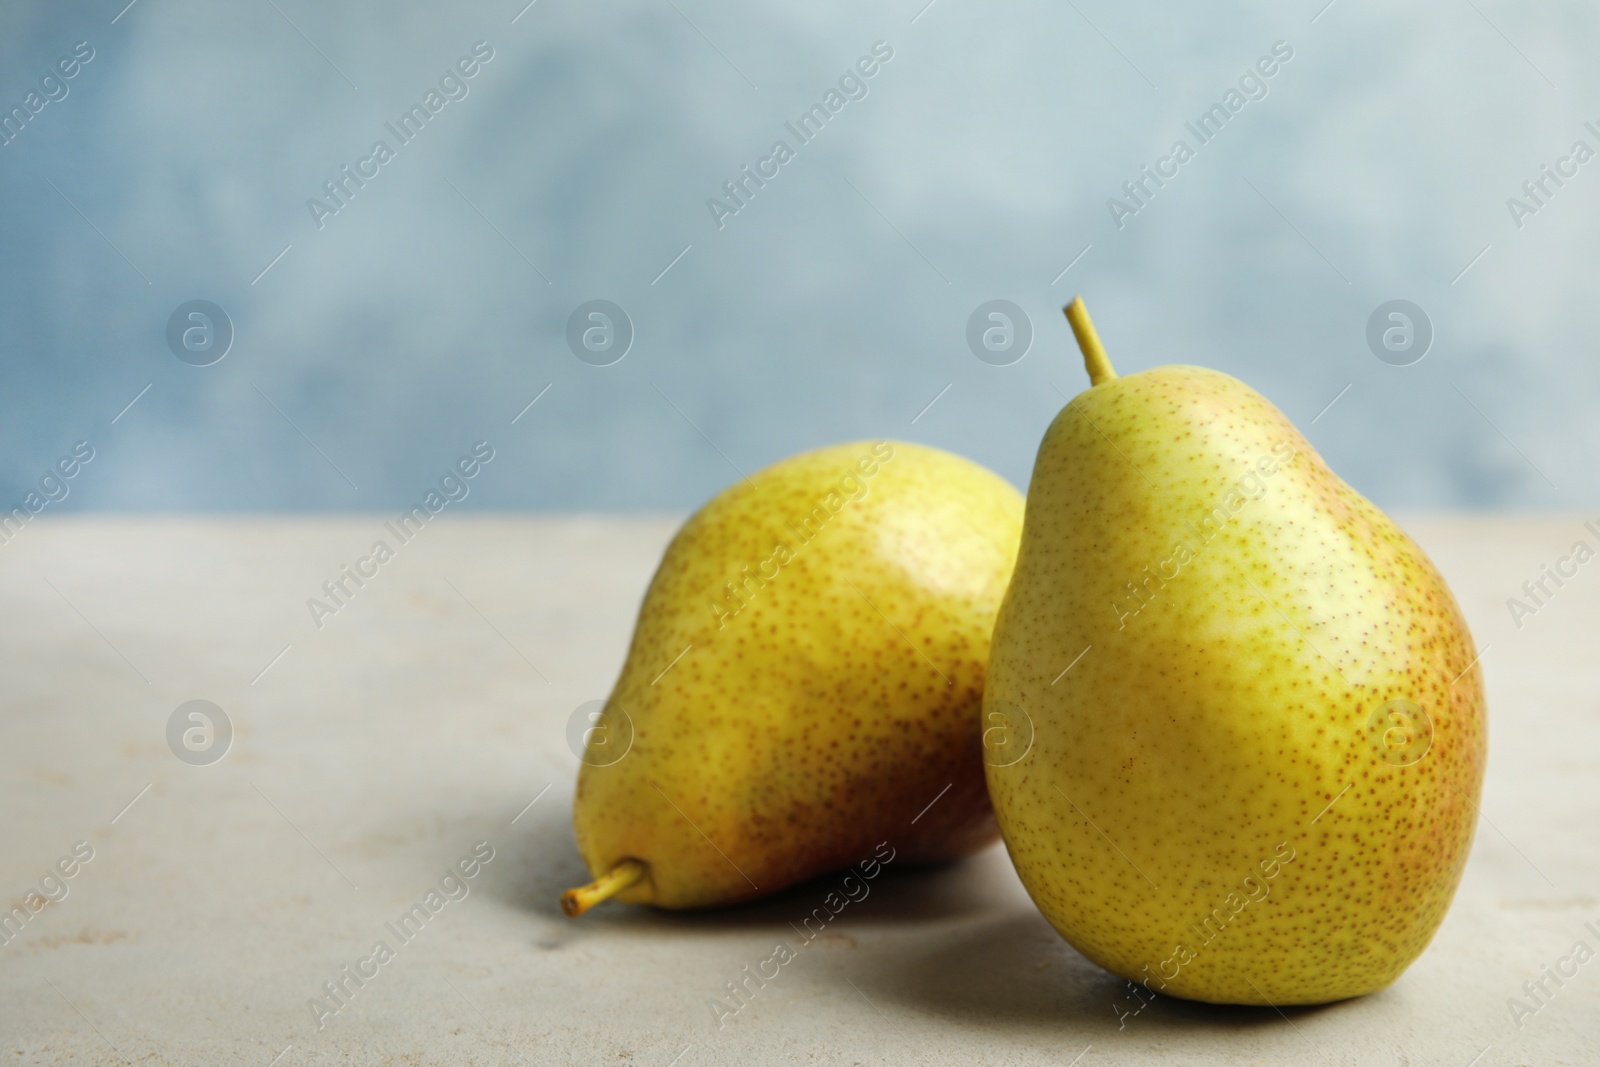 Photo of Ripe juicy pears on grey stone table against blue background. Space for text